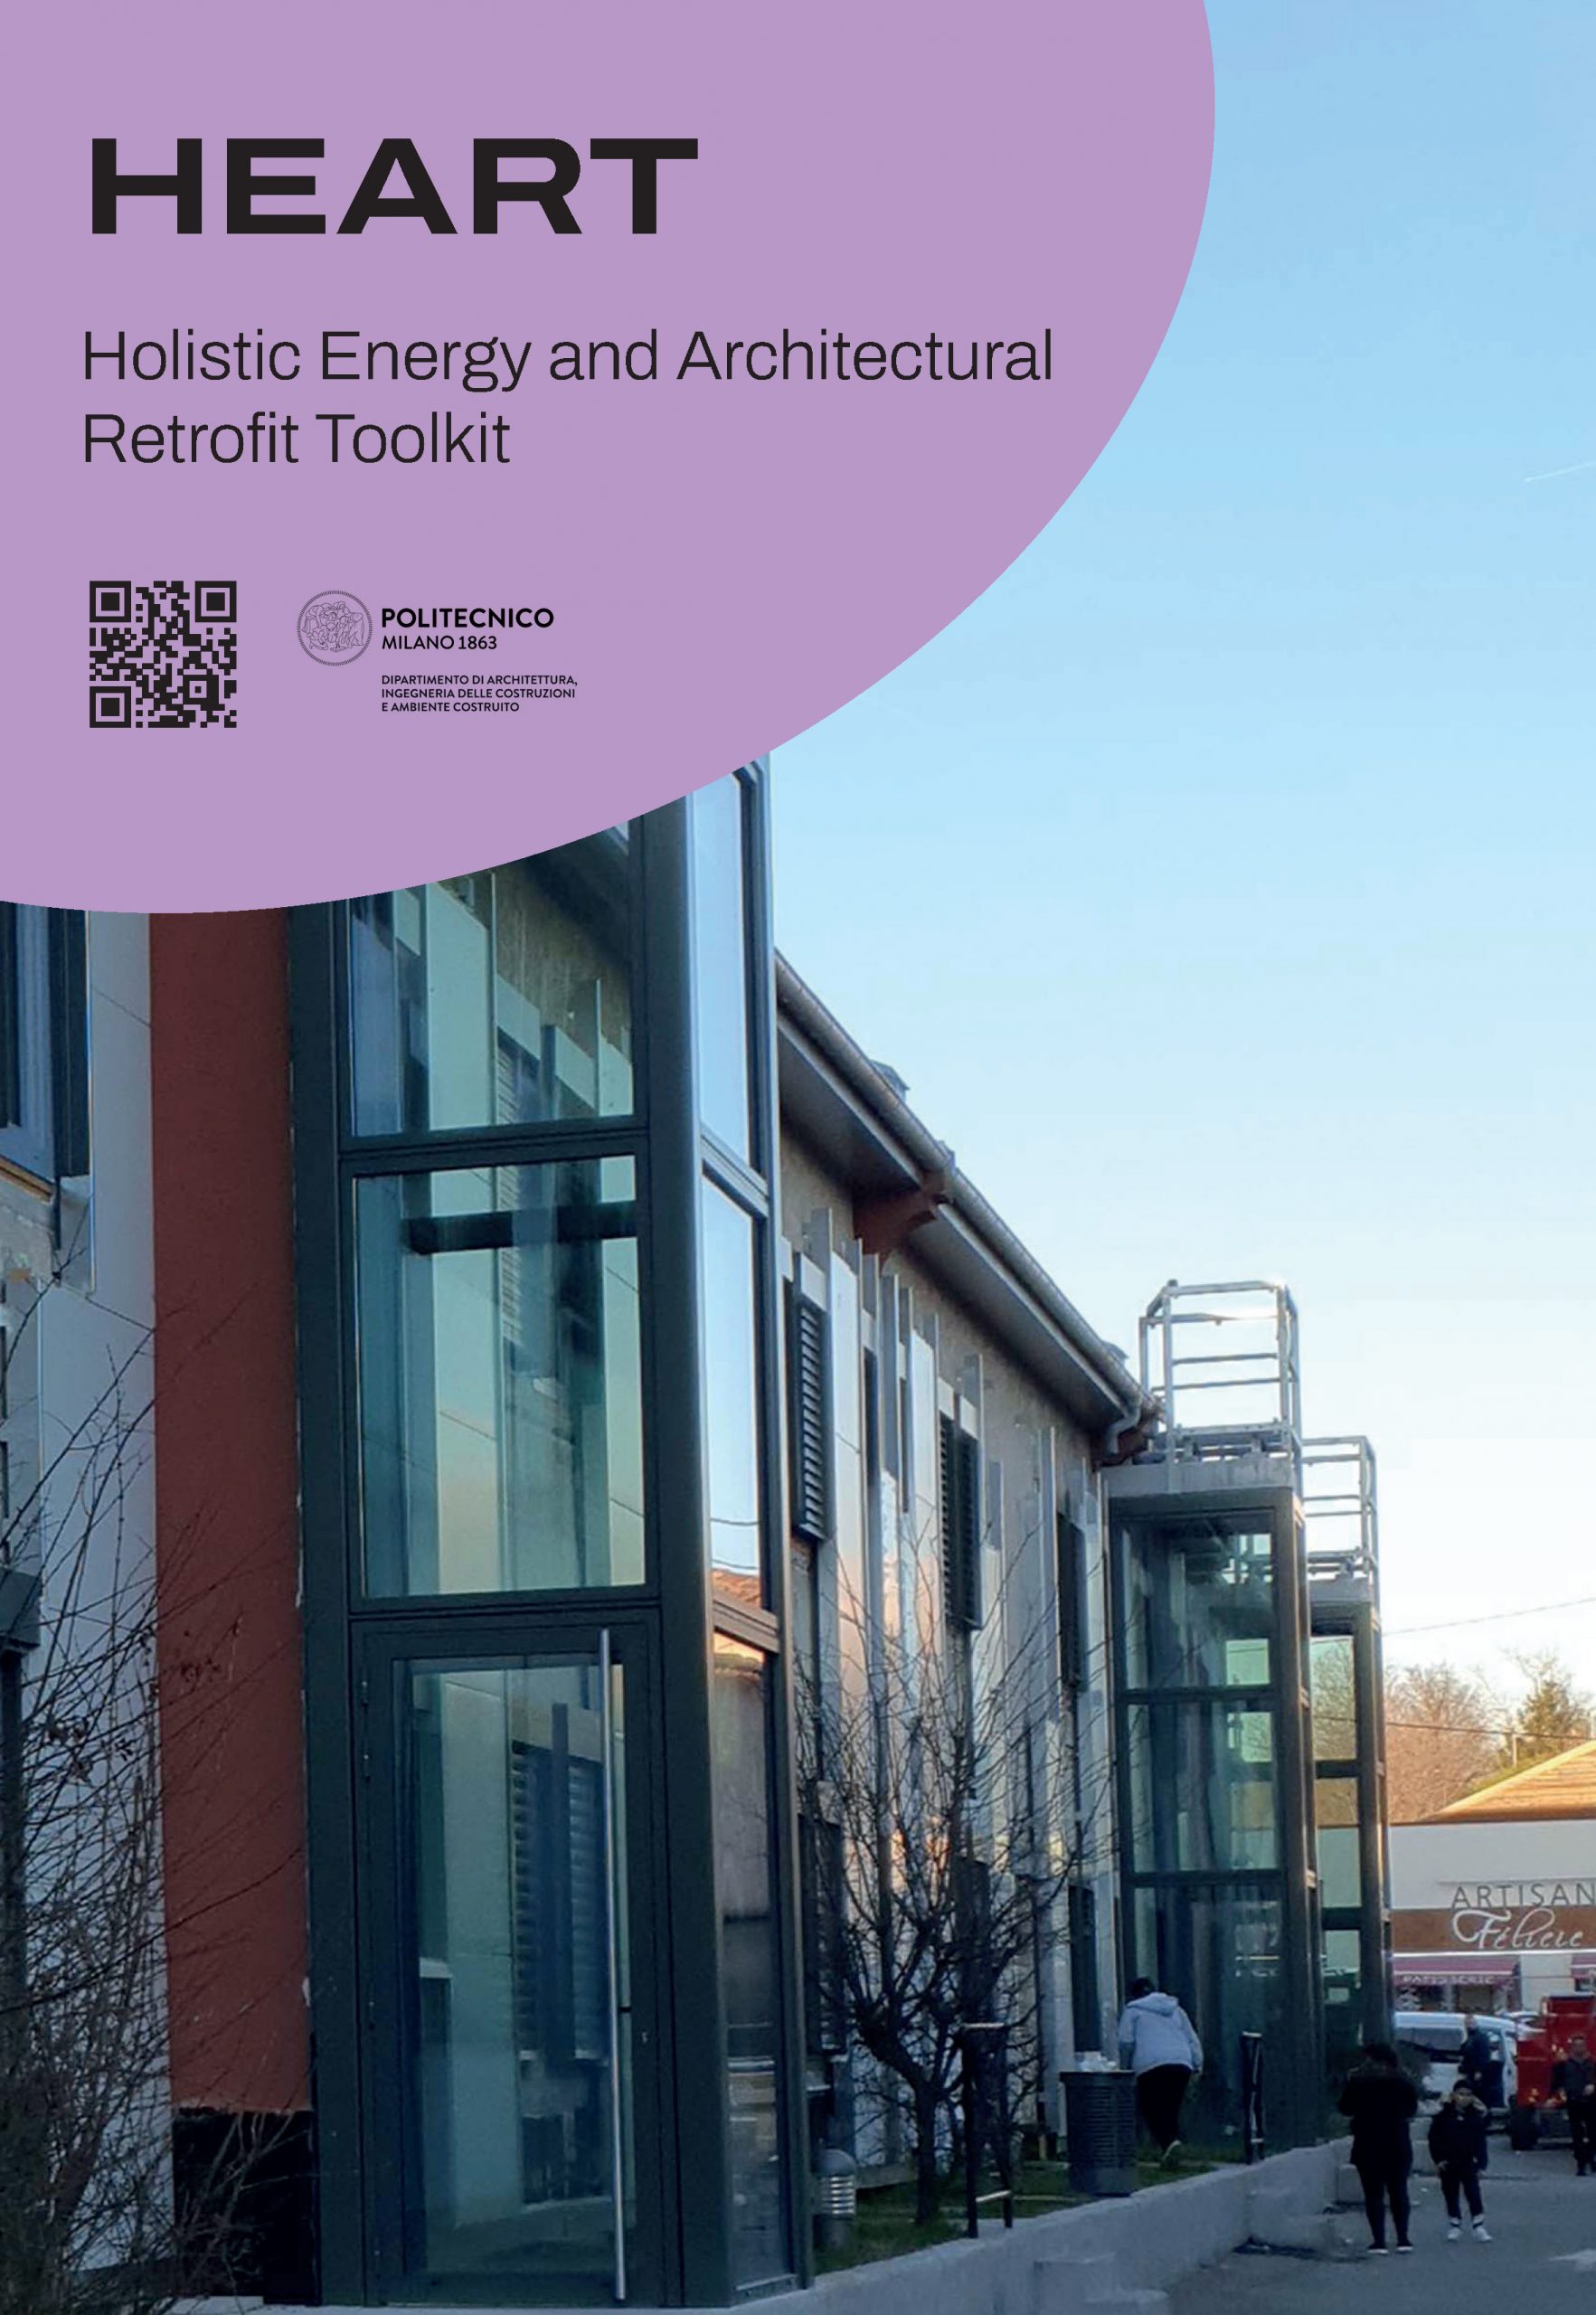 HEART. Holistic Energy and Architectural Retrofit Toolkit